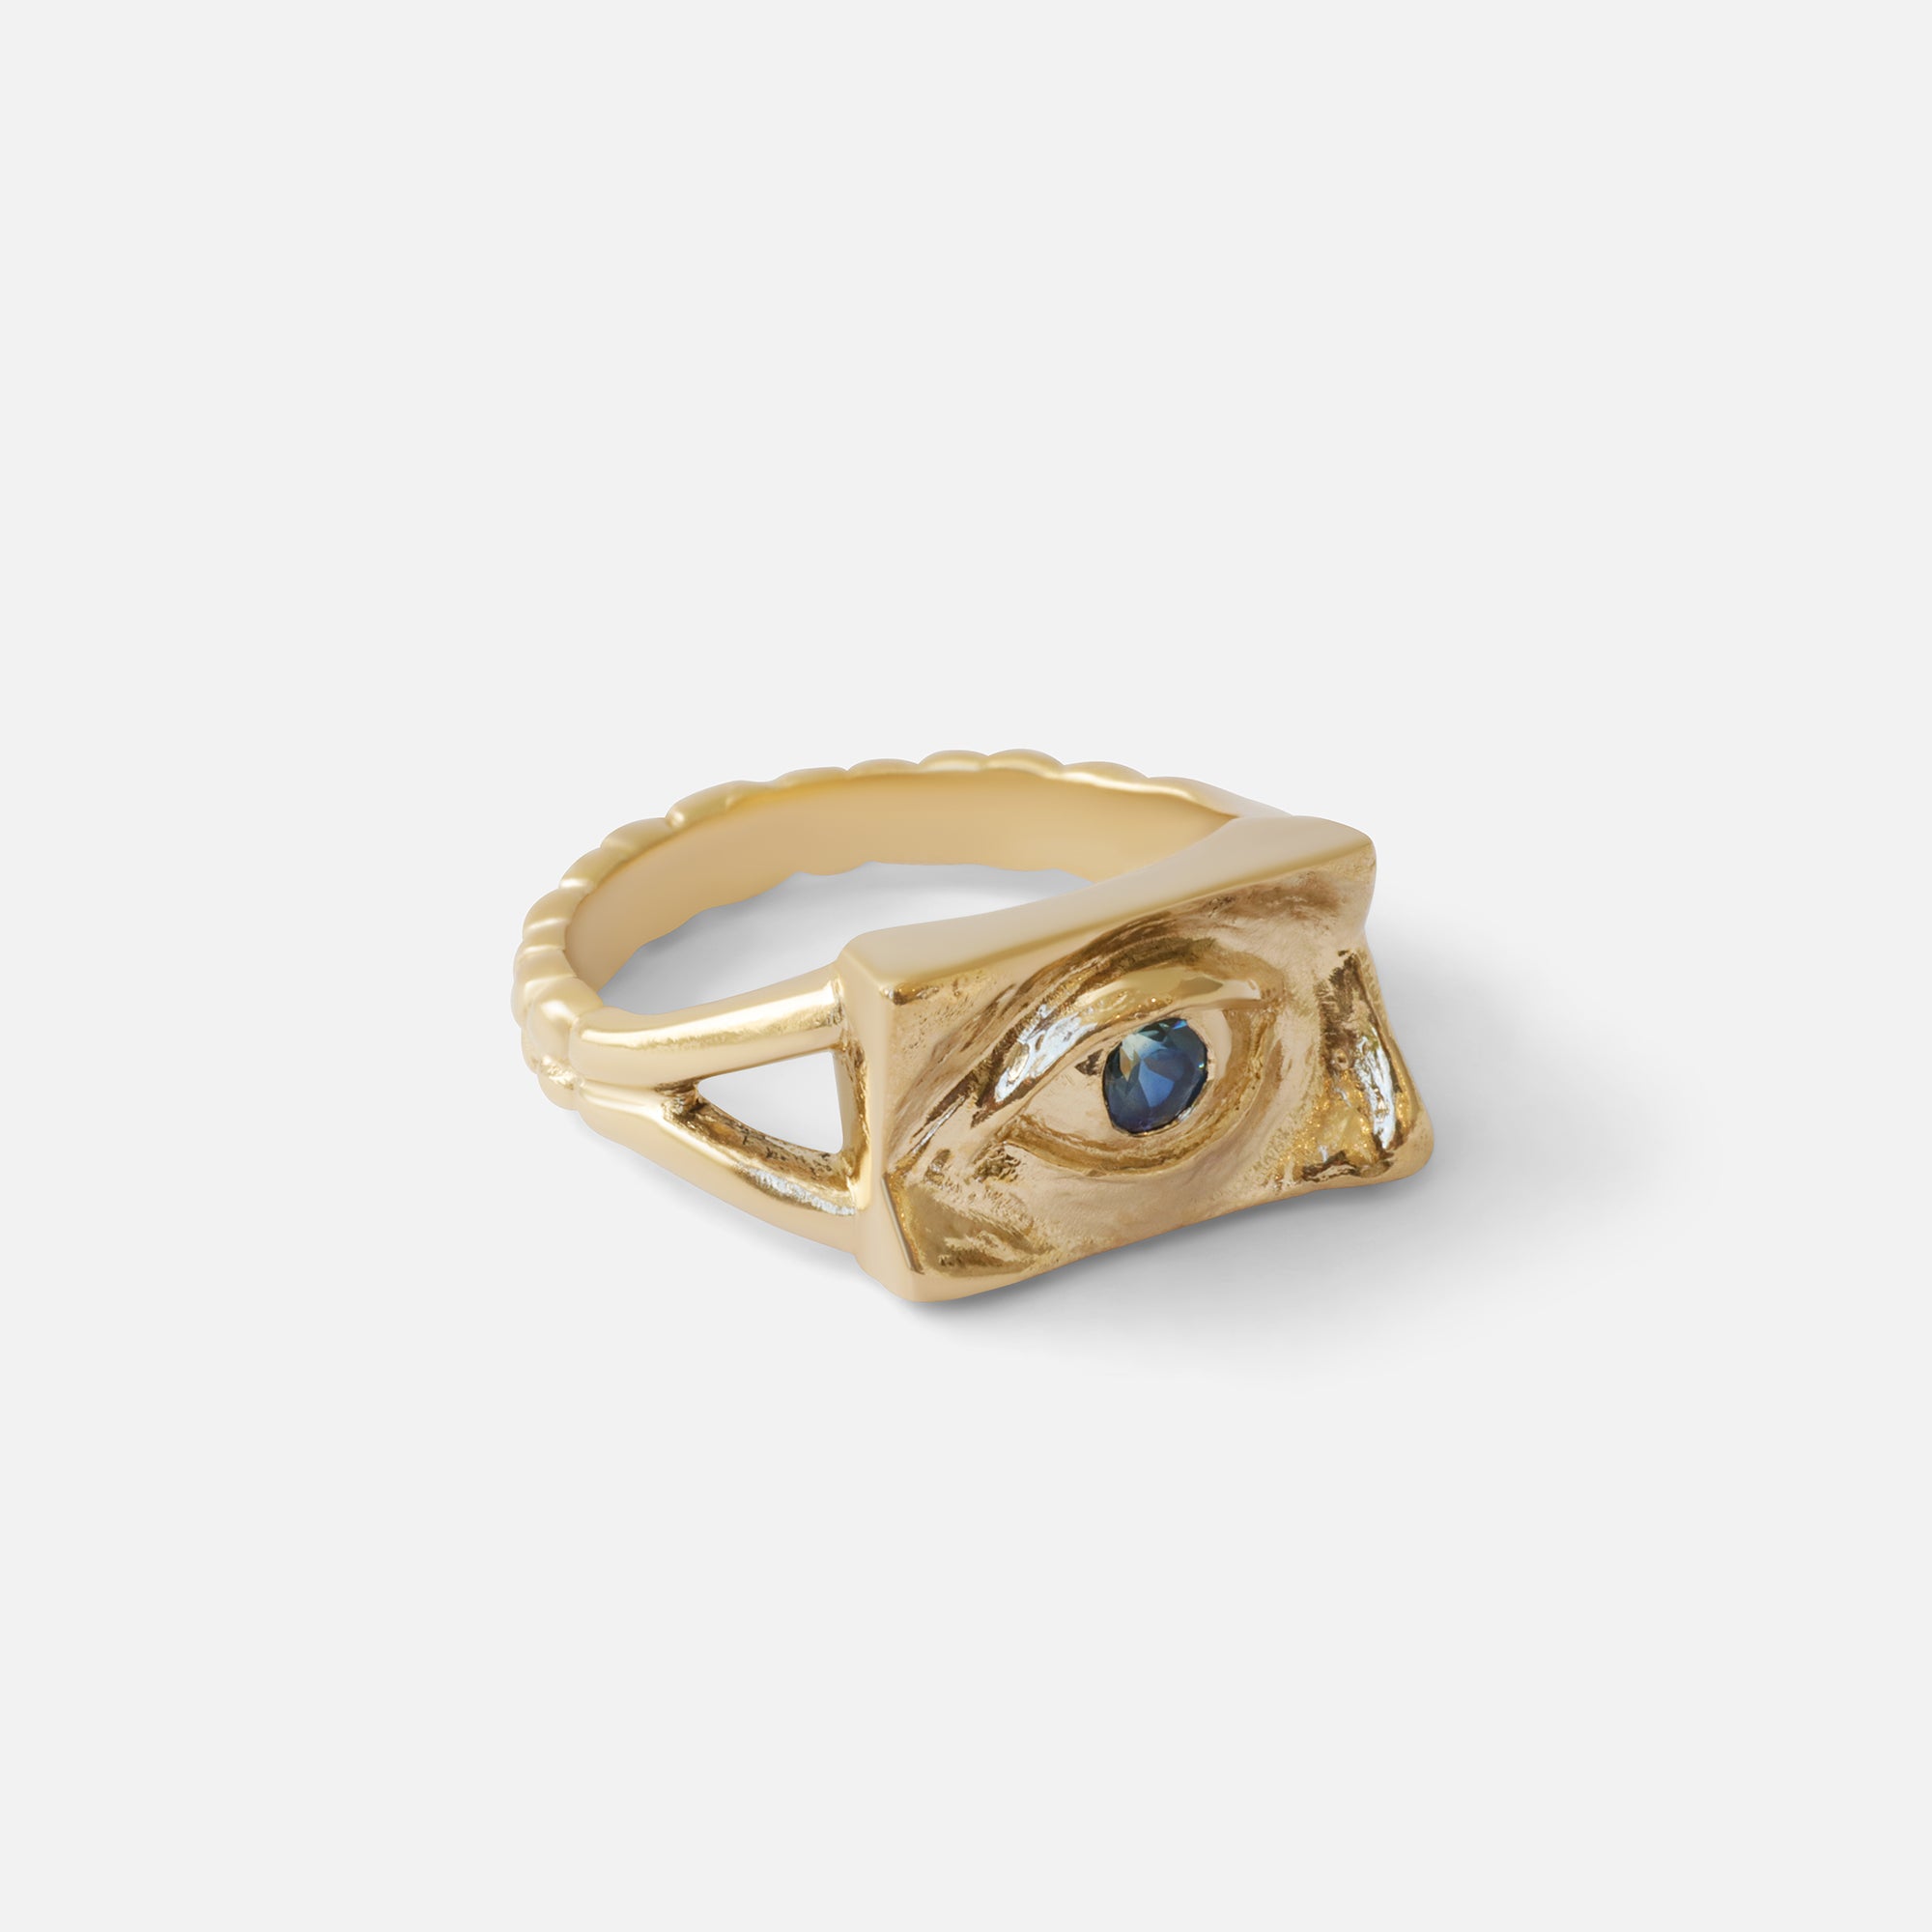 Intagliaux / Blue Sapphire Ring By Alfonzo in rings Category